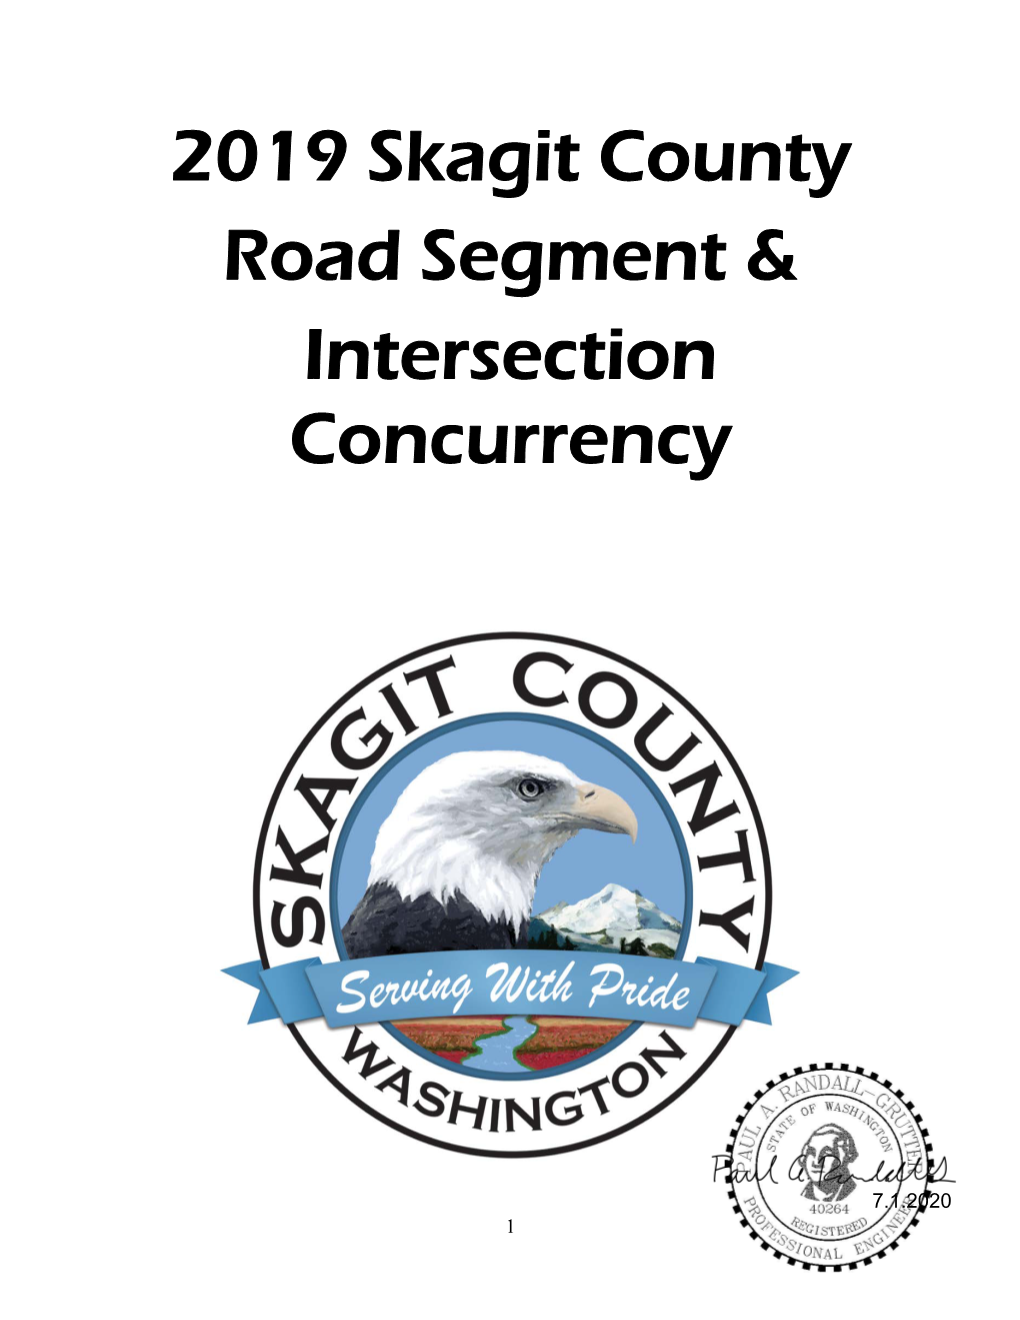 2019 Skagit County Road Segment & Intersection Concurrency